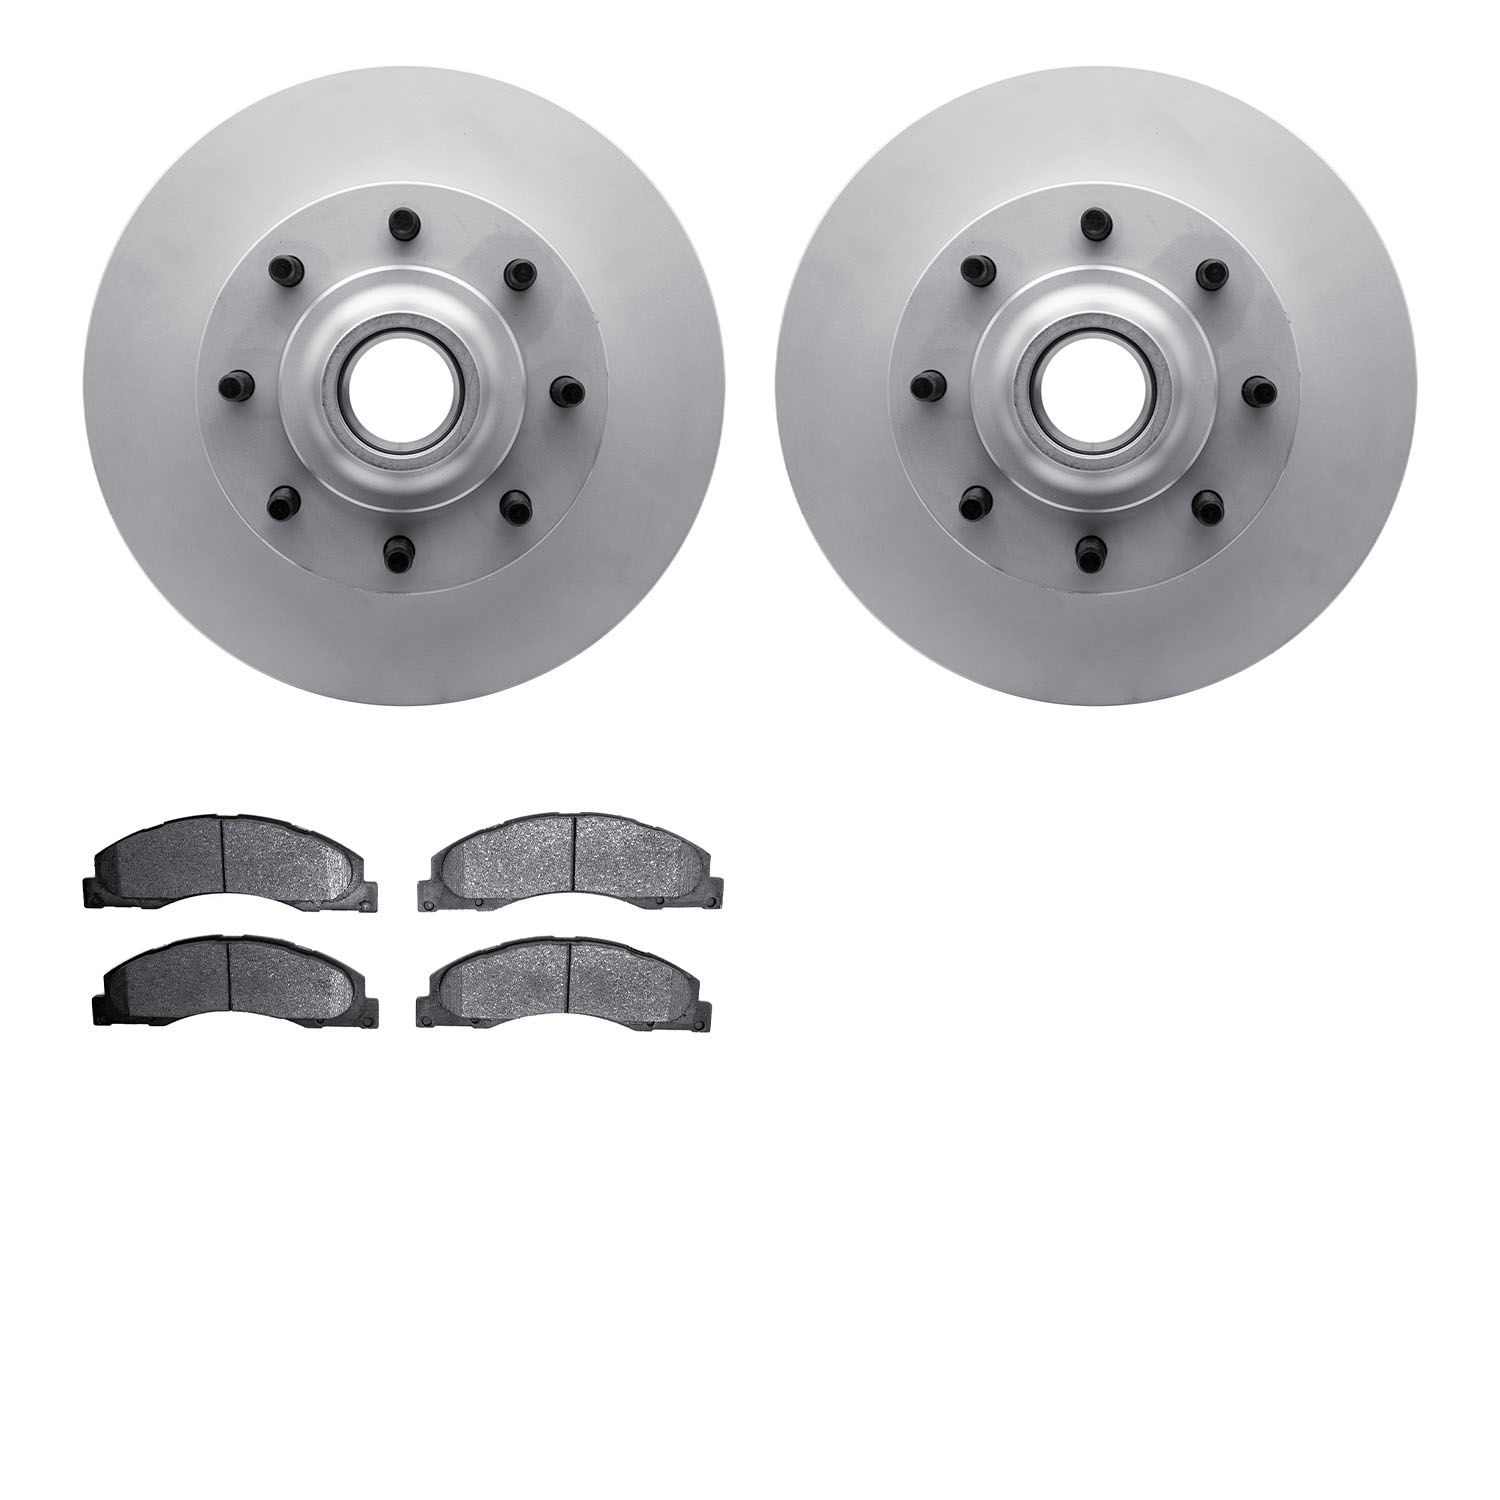 4202-99178 Geospec Brake Rotors w/Heavy-Duty Brake Pads Kit, Fits Select Ford/Lincoln/Mercury/Mazda, Position: Front